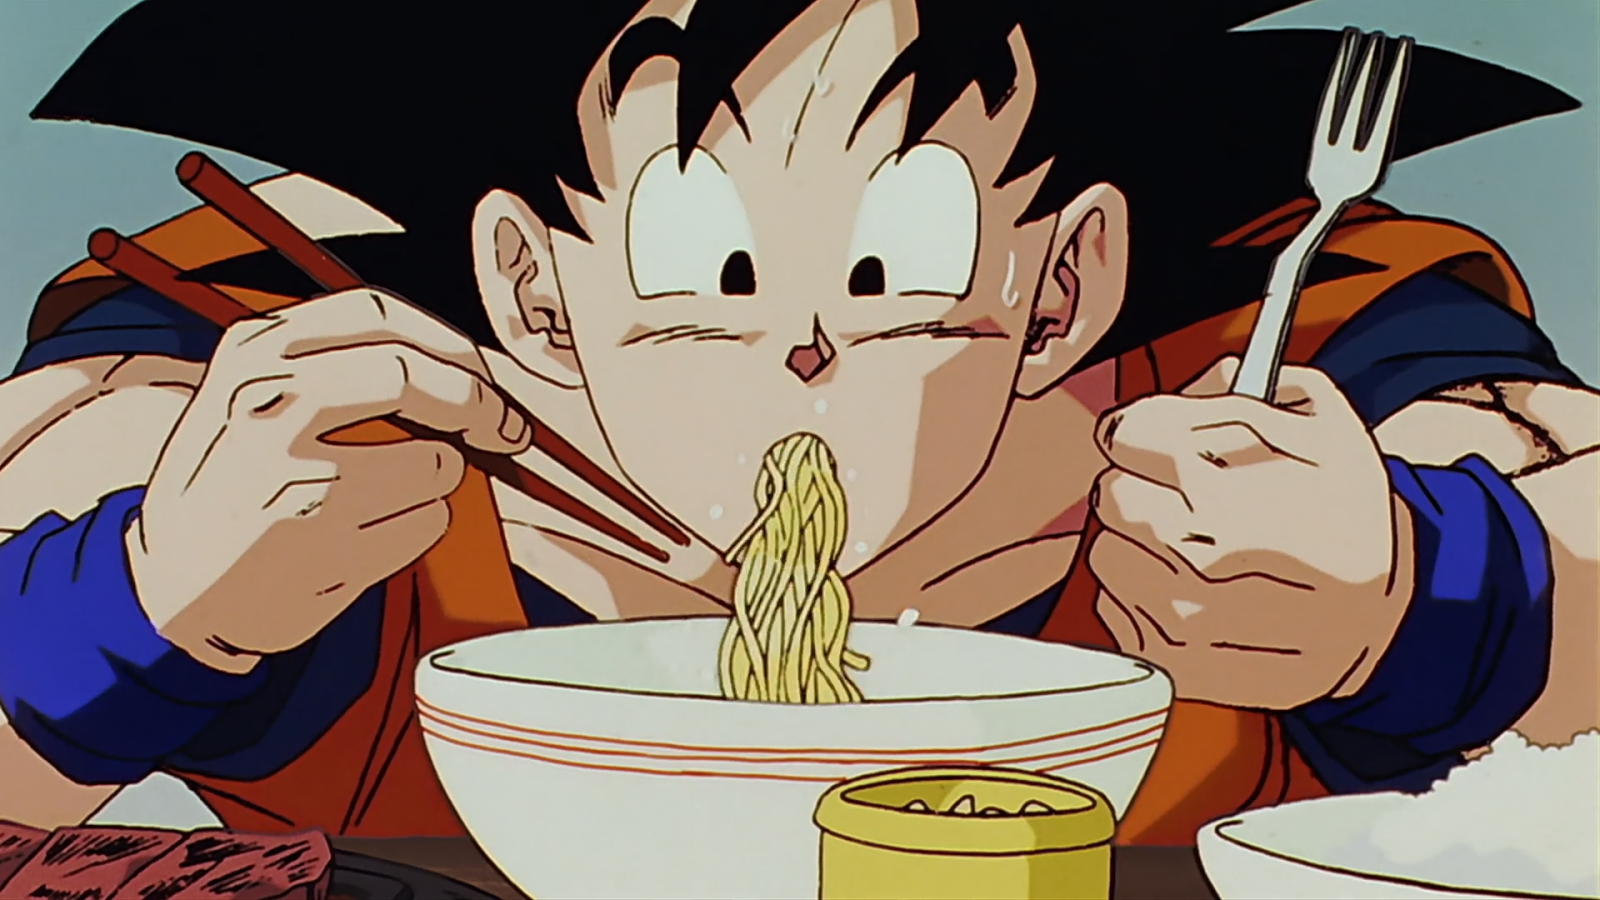 Eating noodles gif